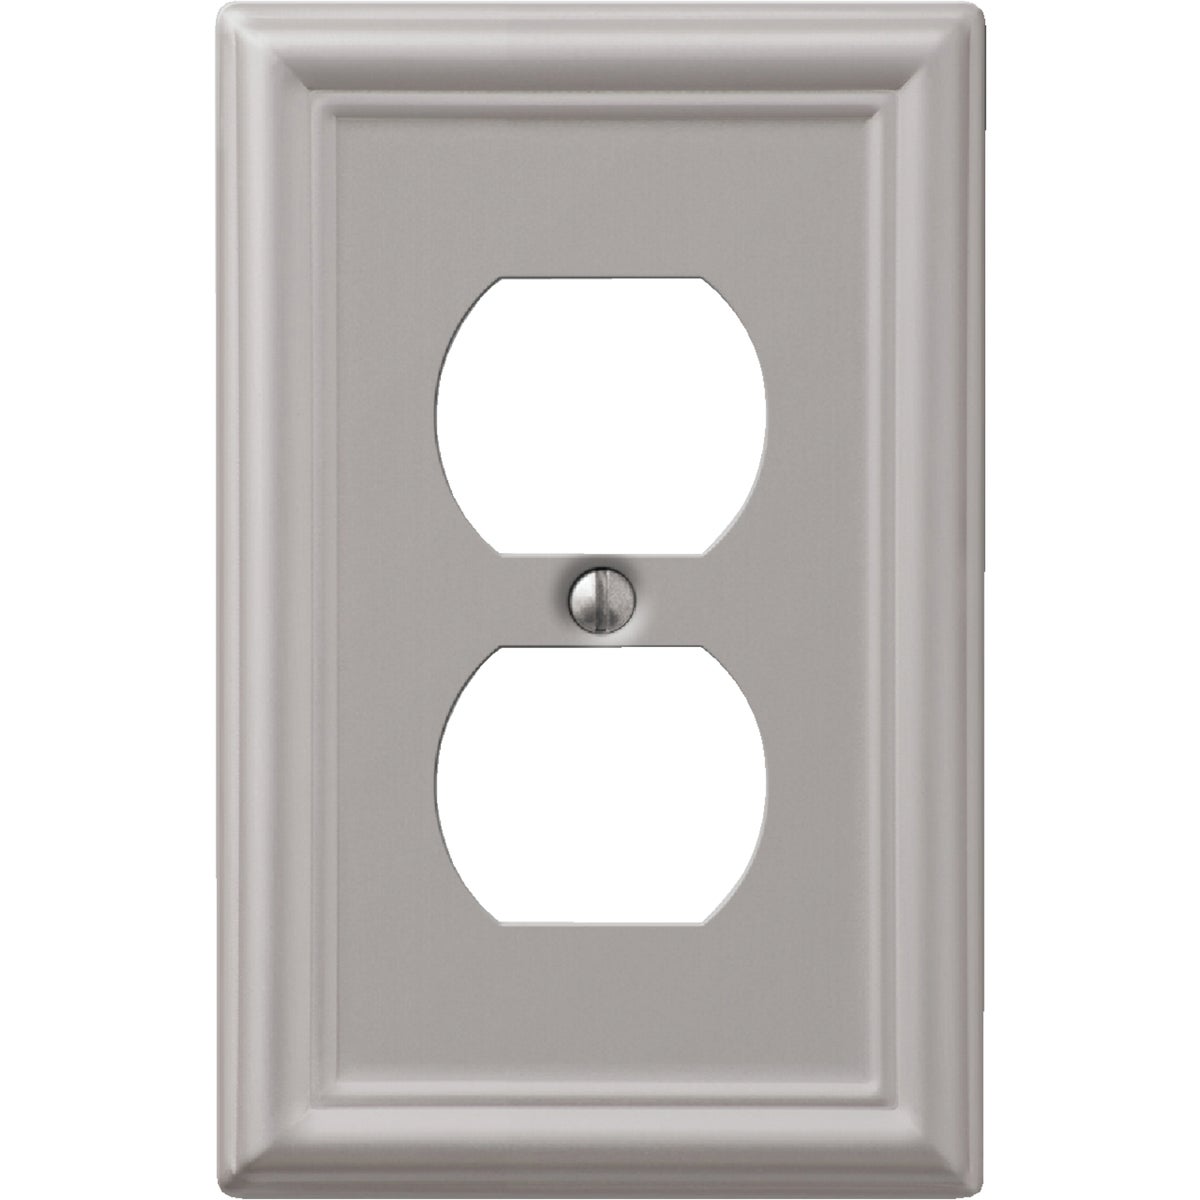 Item 500239, Chelsea stamped steel duplex outlet wall plate. Durable and stylish.